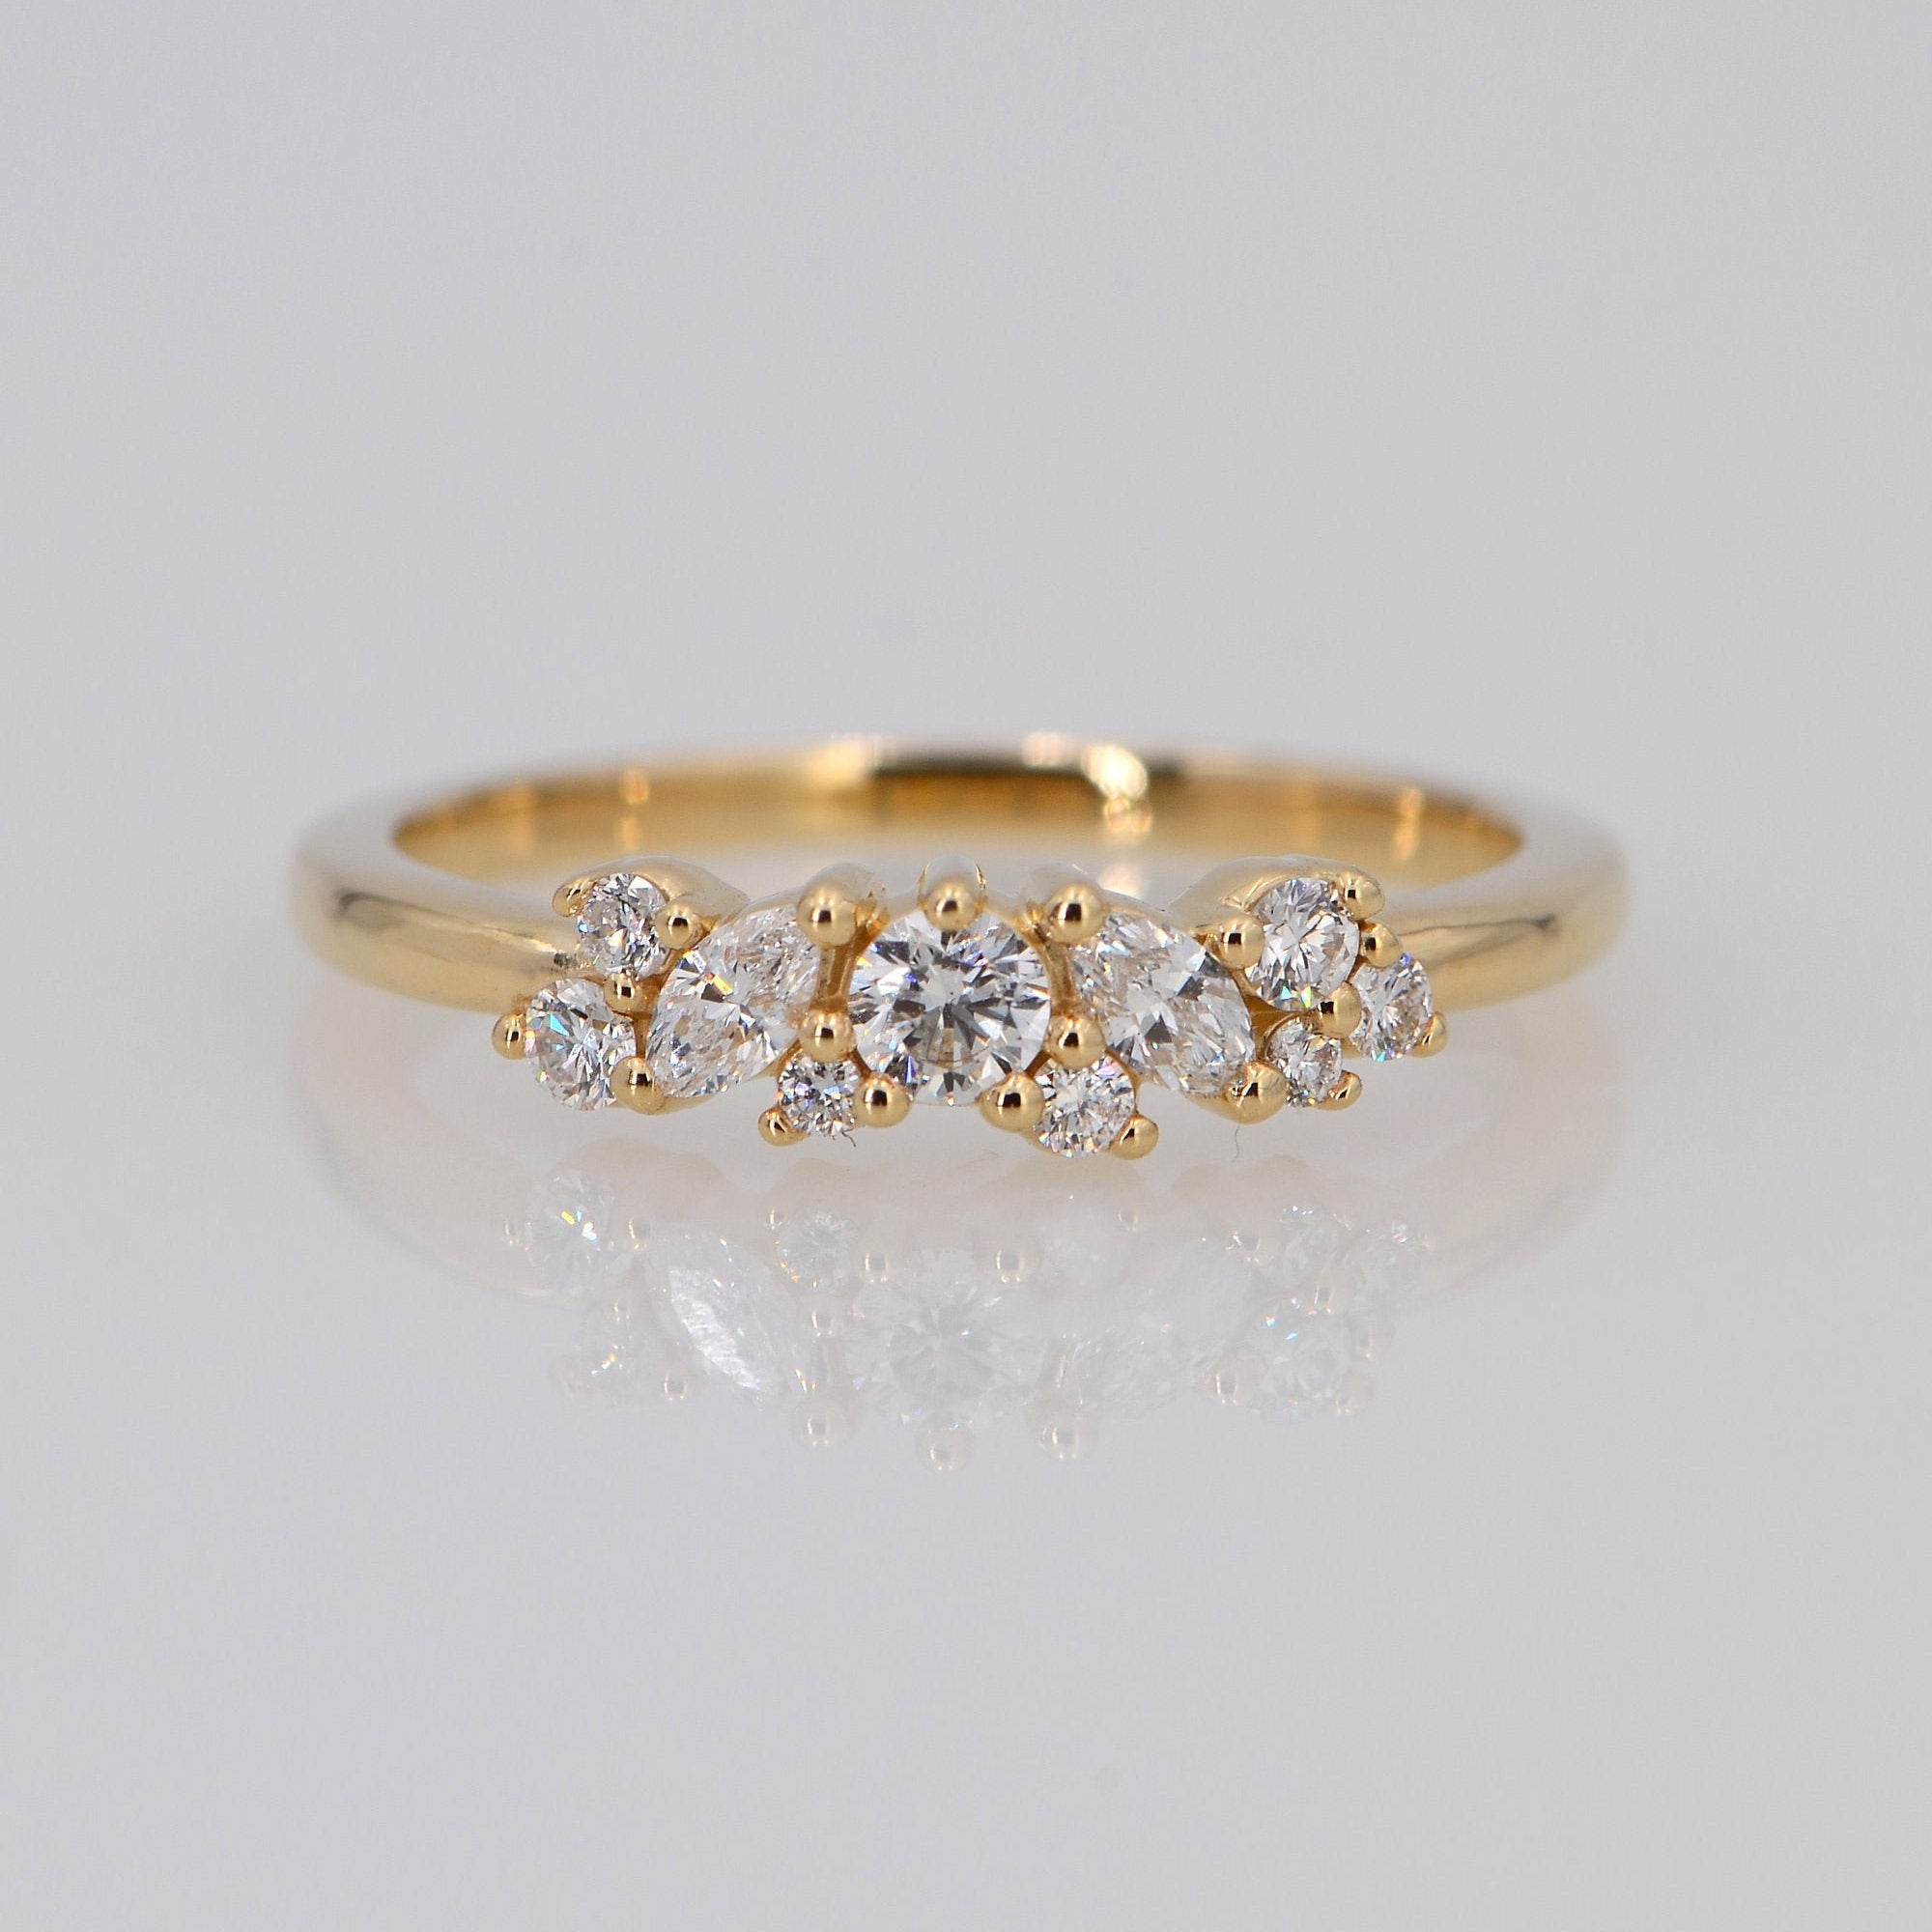 18 Carat Gold Ring Price Starting From Rs 5,000/Gm. Find Verified Sellers  in Bikaner - JdMart